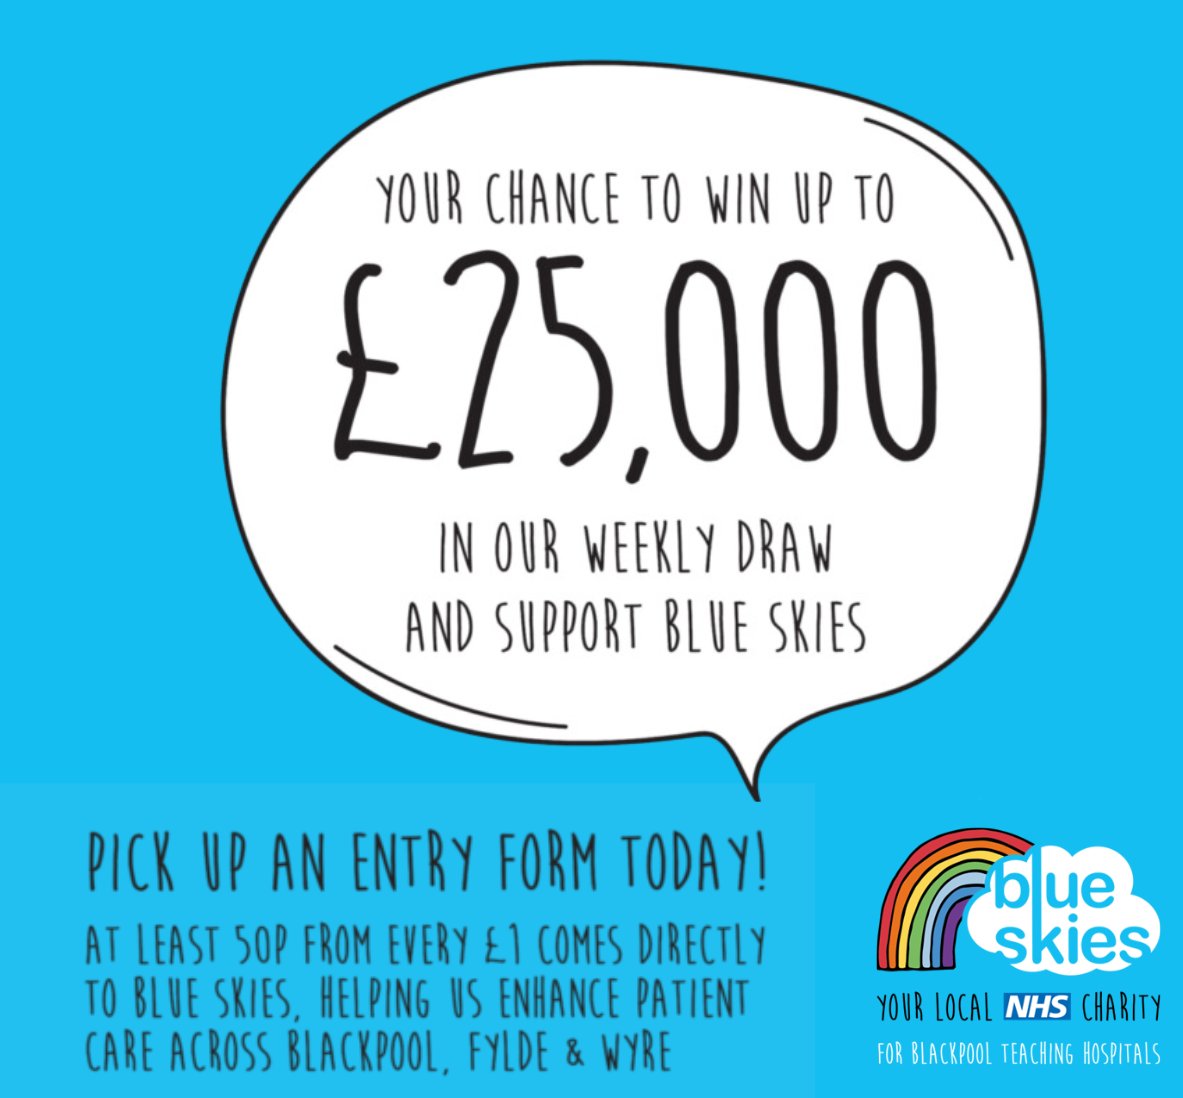 Want the chance to win up to £25,000? Every week you can have the chance to win the £25,000 jackpot plus many other fantastic cash prizes, and at the same time you’re helping us raise funds to support our work. Click here to sign up. blueskiescharity.co.uk/lottery/